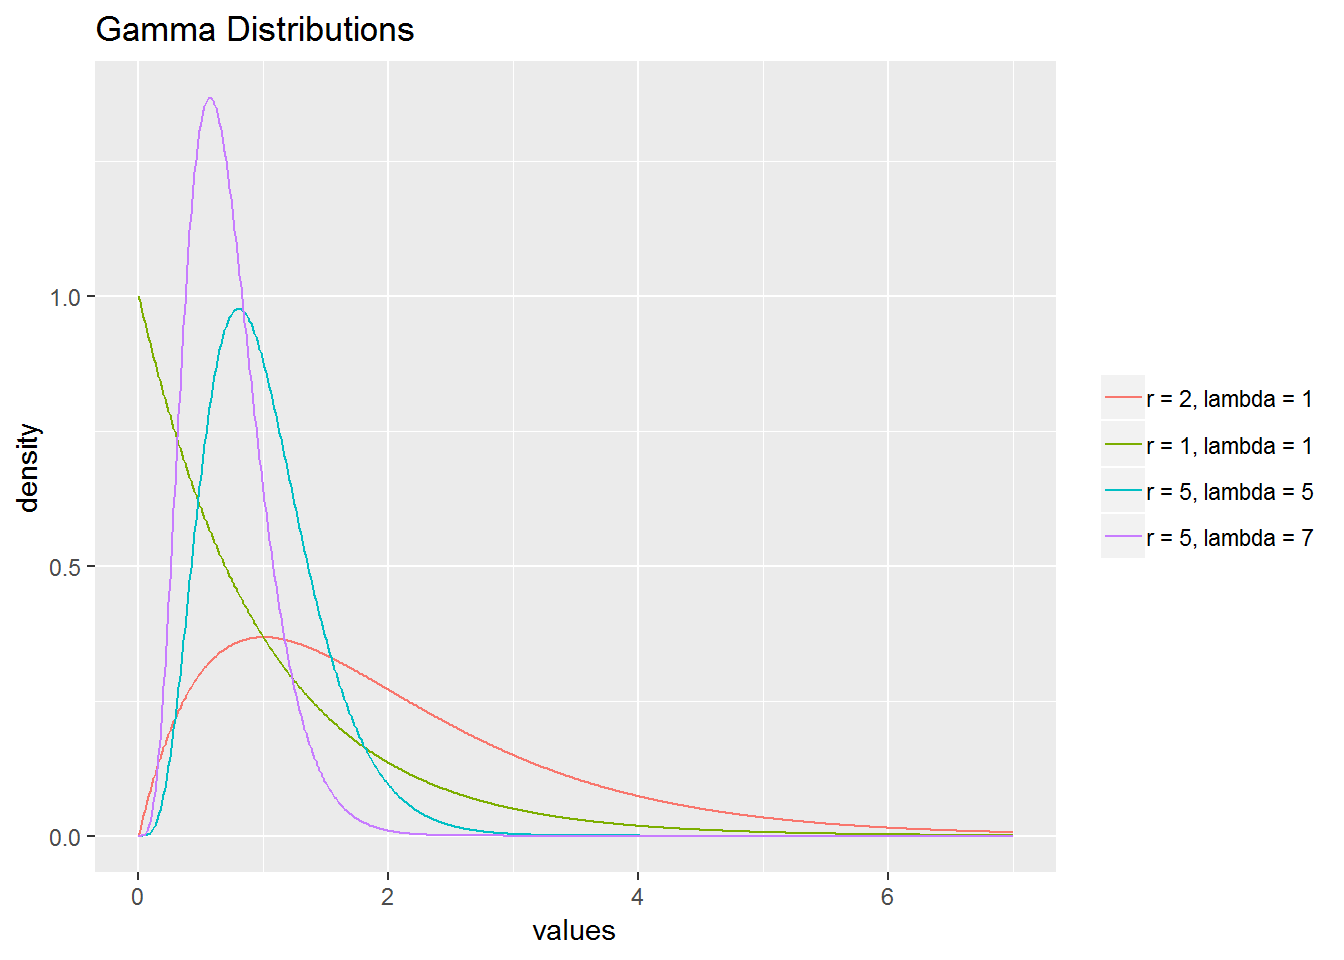 Gamma distributions with different values of \(r\) and \(\lambda\).